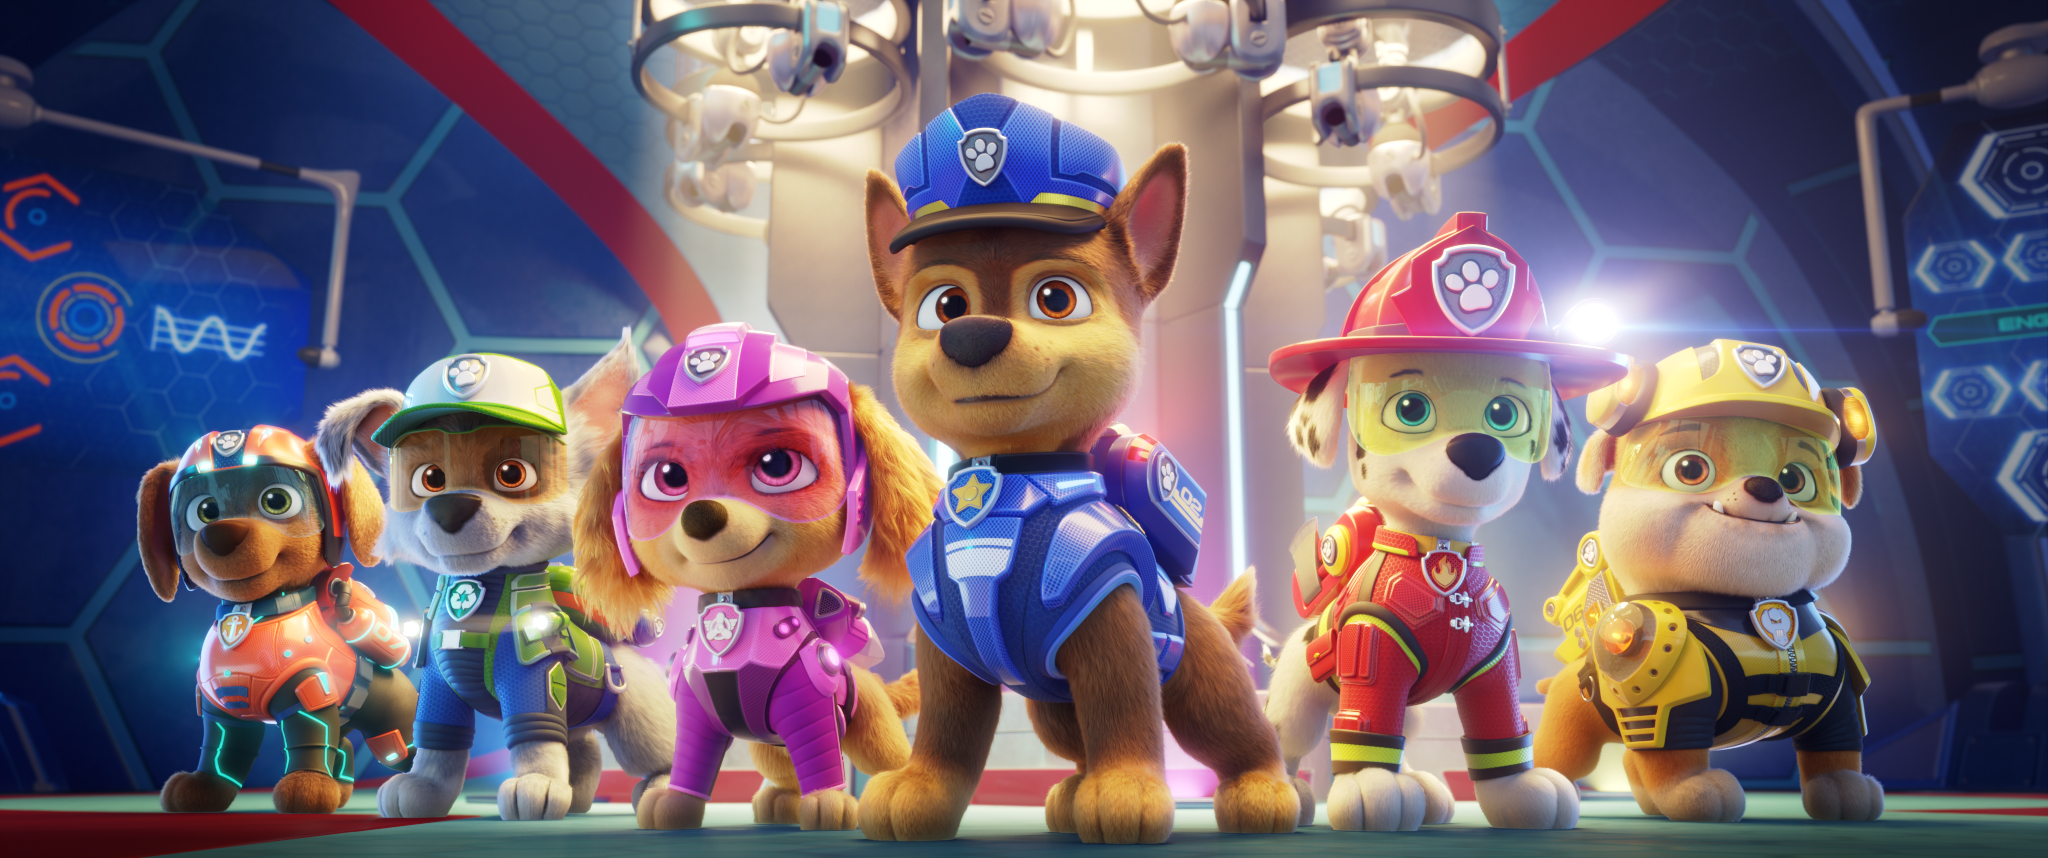 Paw Patrol is another popular show for kids that falls under Noggin